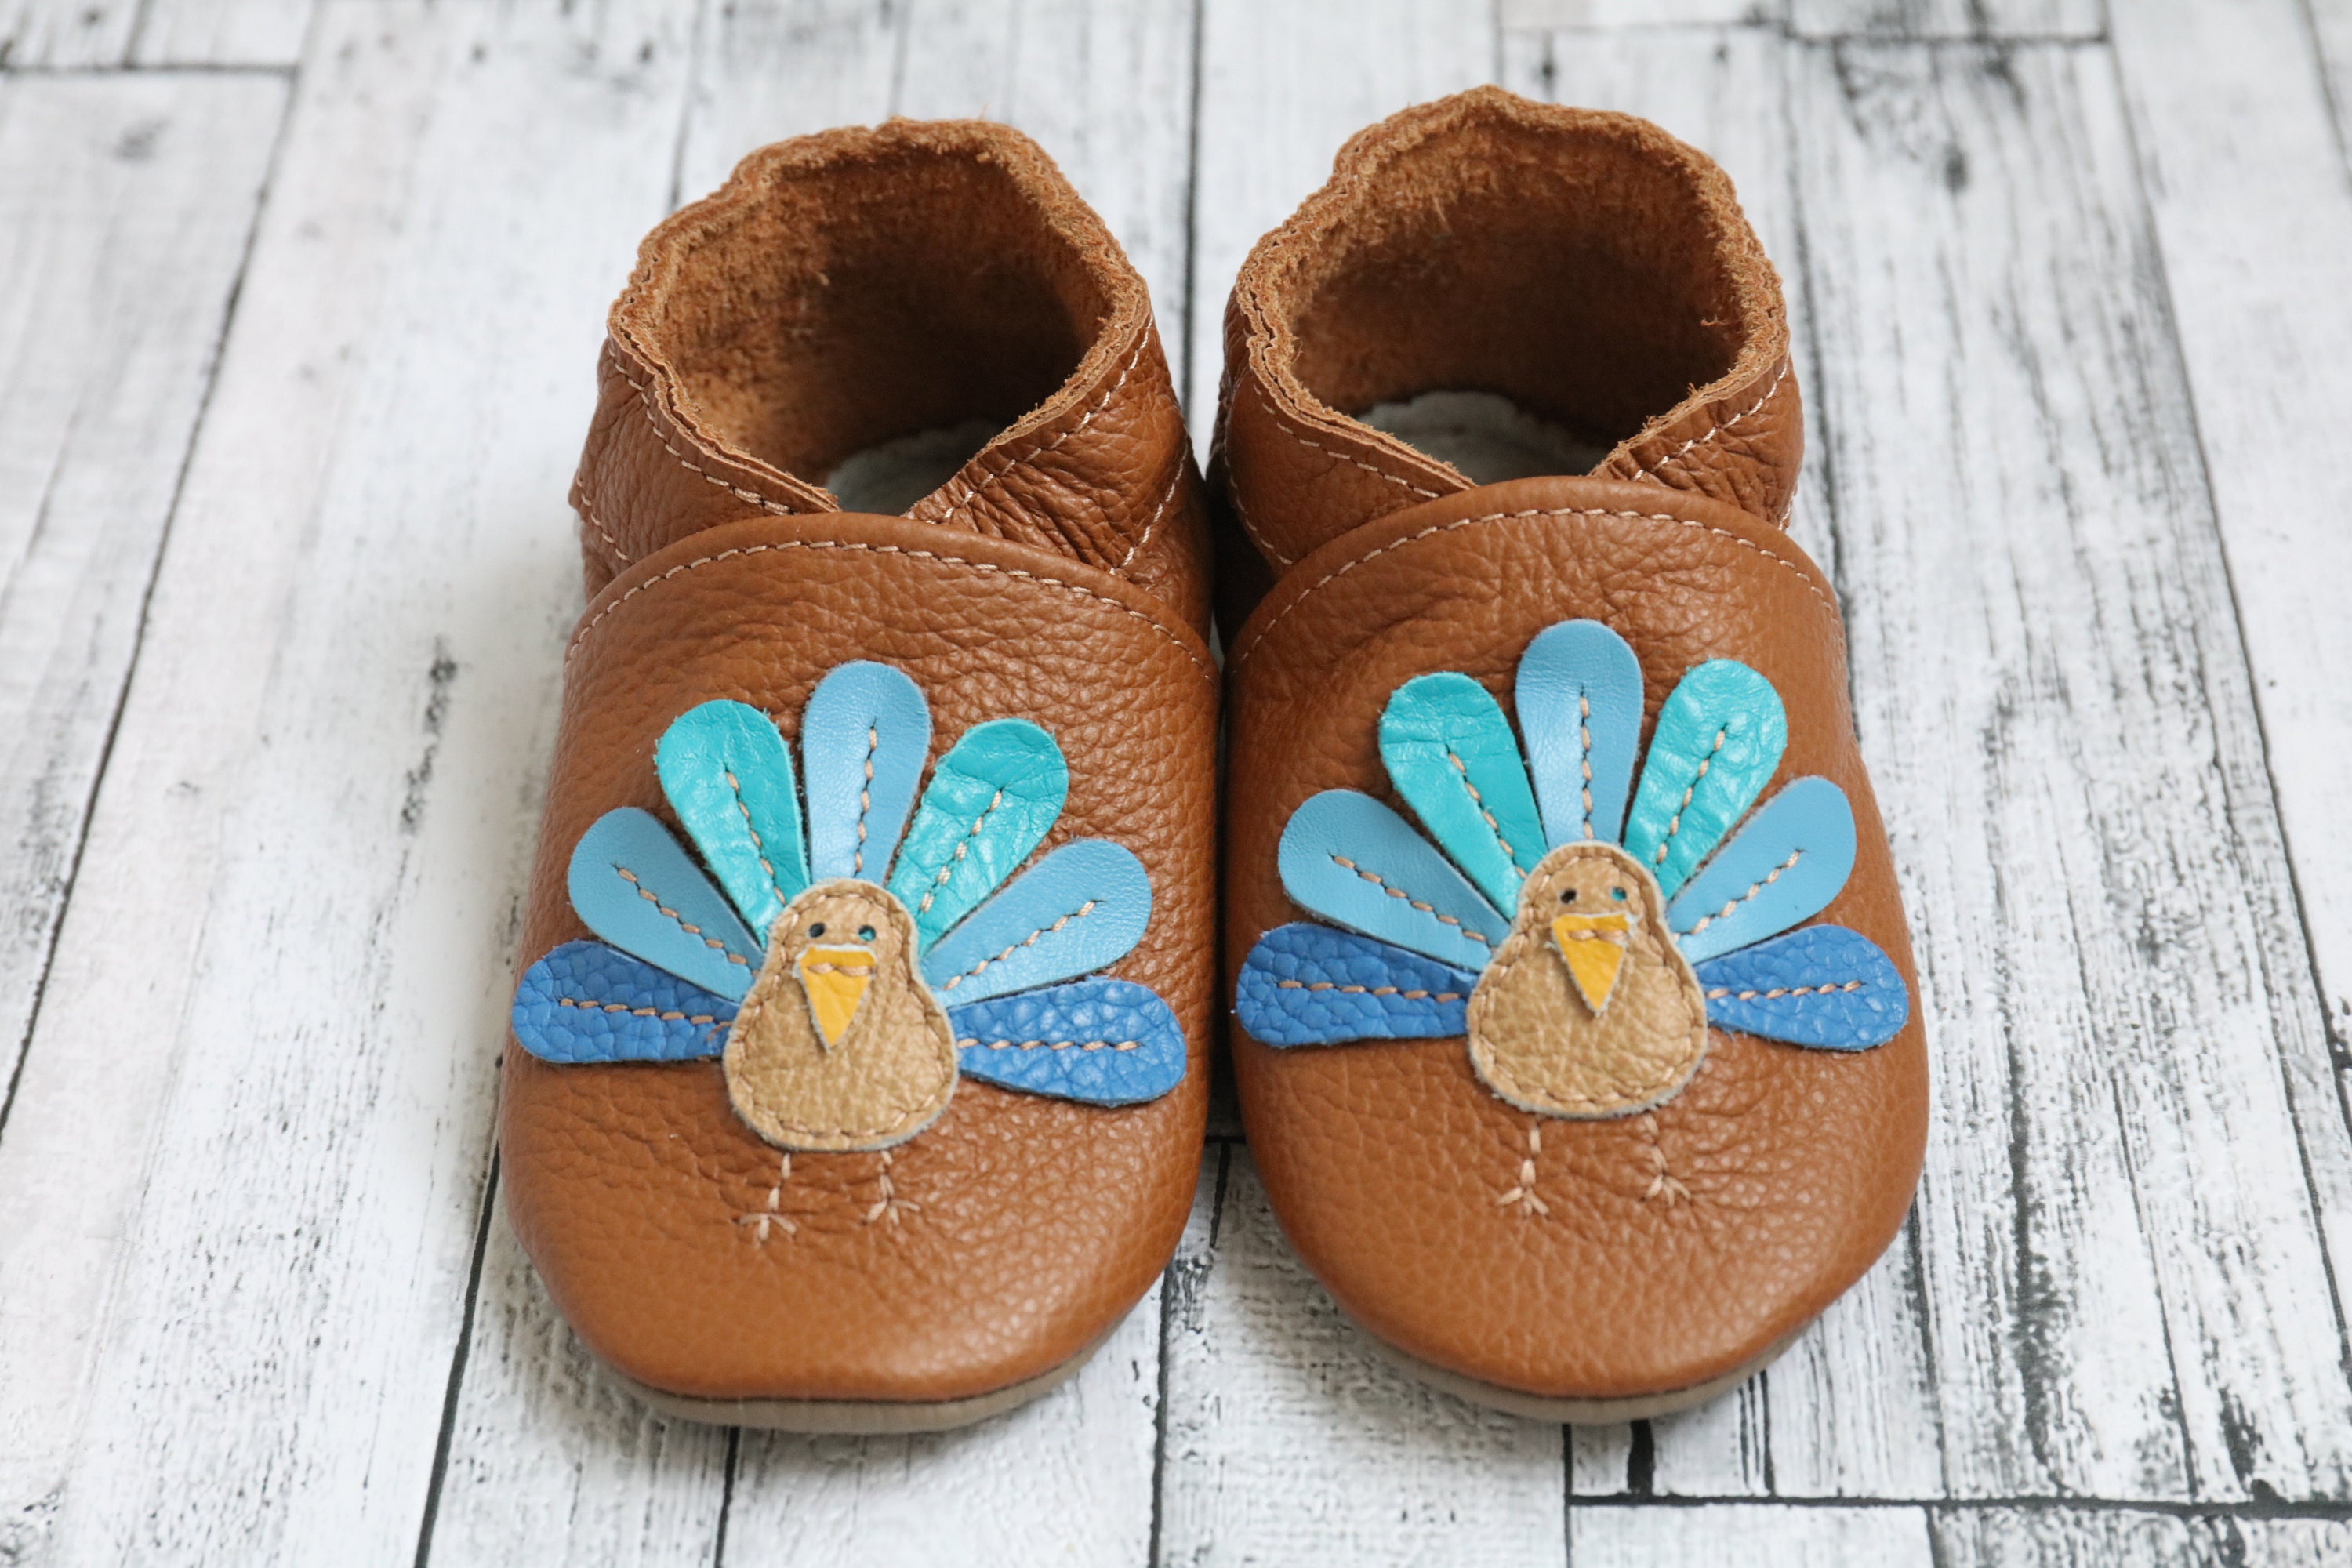 Video: Sew Soft Baby Slippers | The DIY Mommy